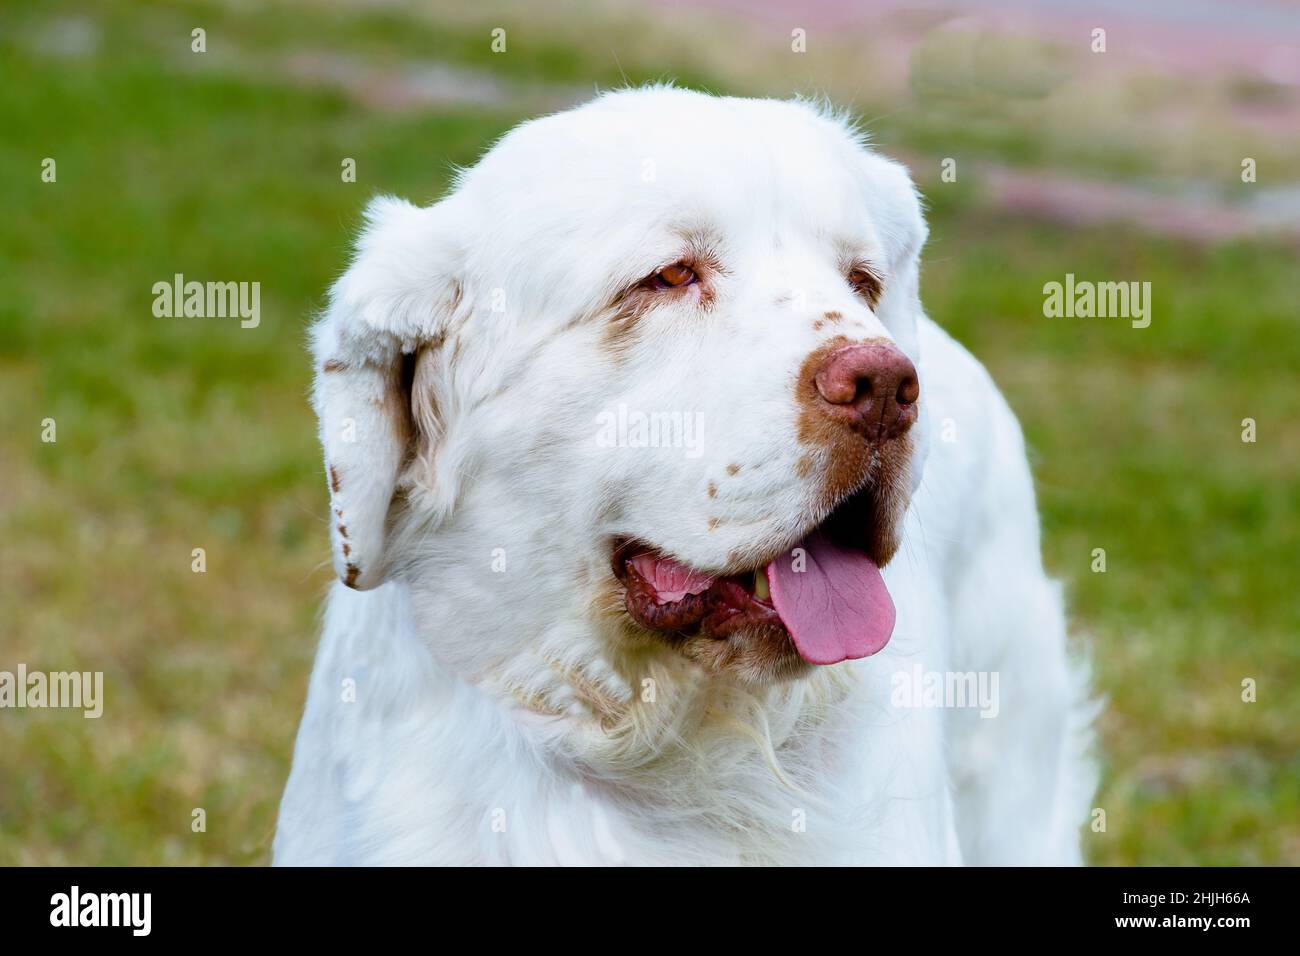 Clumber Spaniel portrait. The Clumber Spaniel stands on the grass in the park. Stock Photo